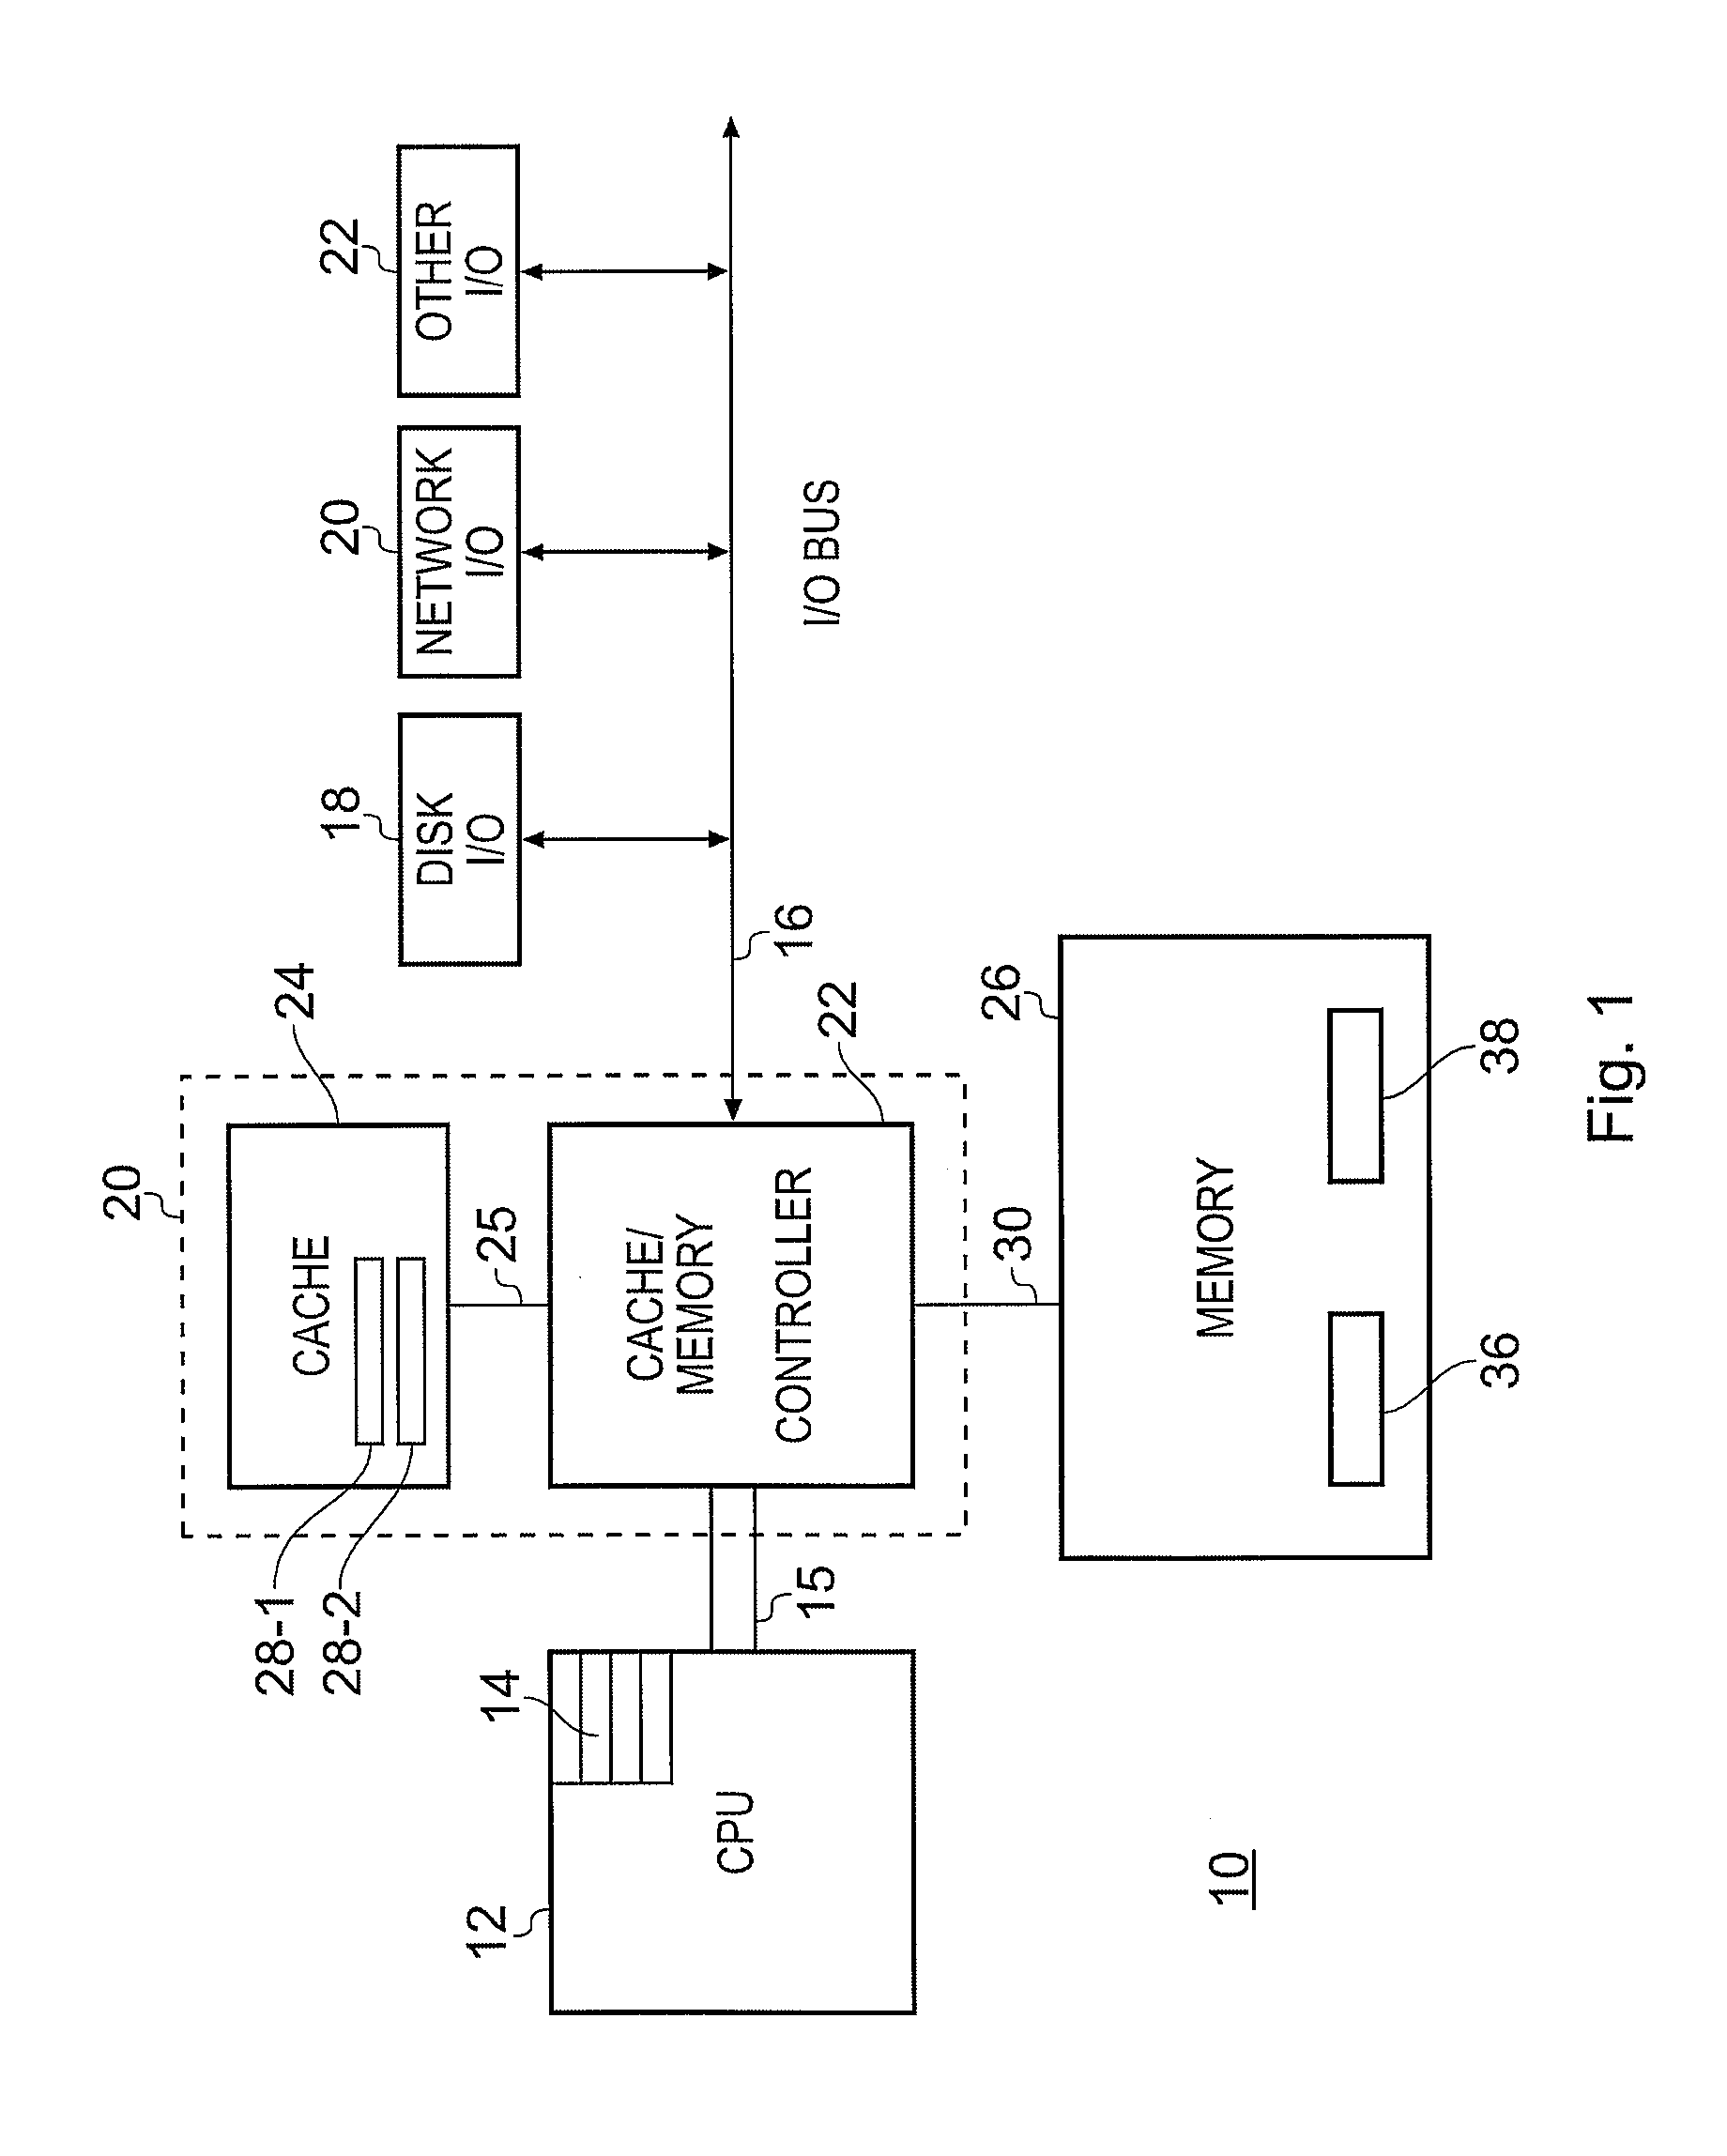 Virtual copy system and method